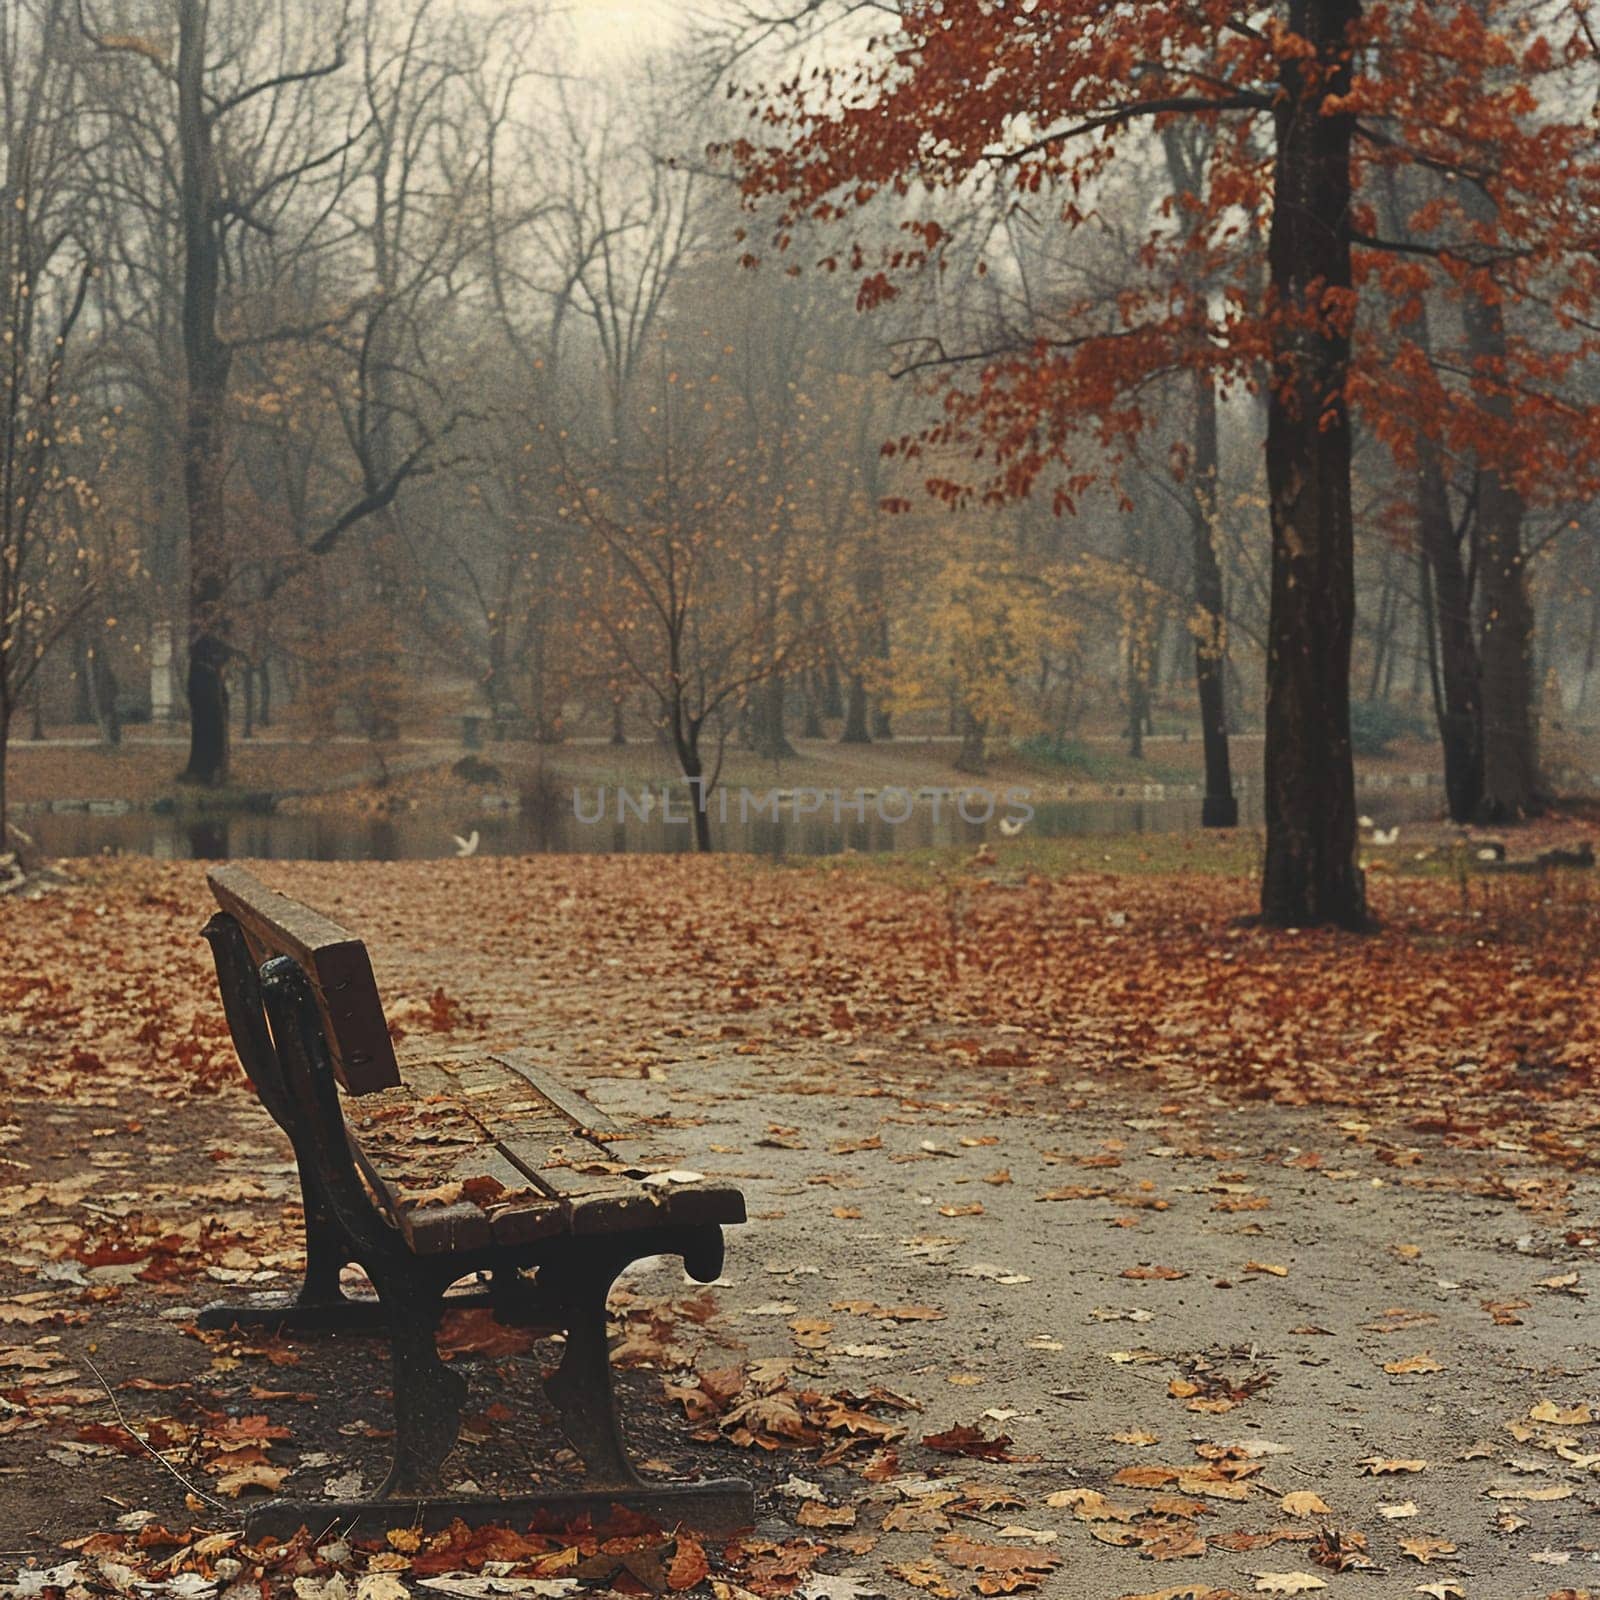 Lonely bench in autumn park, evoking solitude and change.